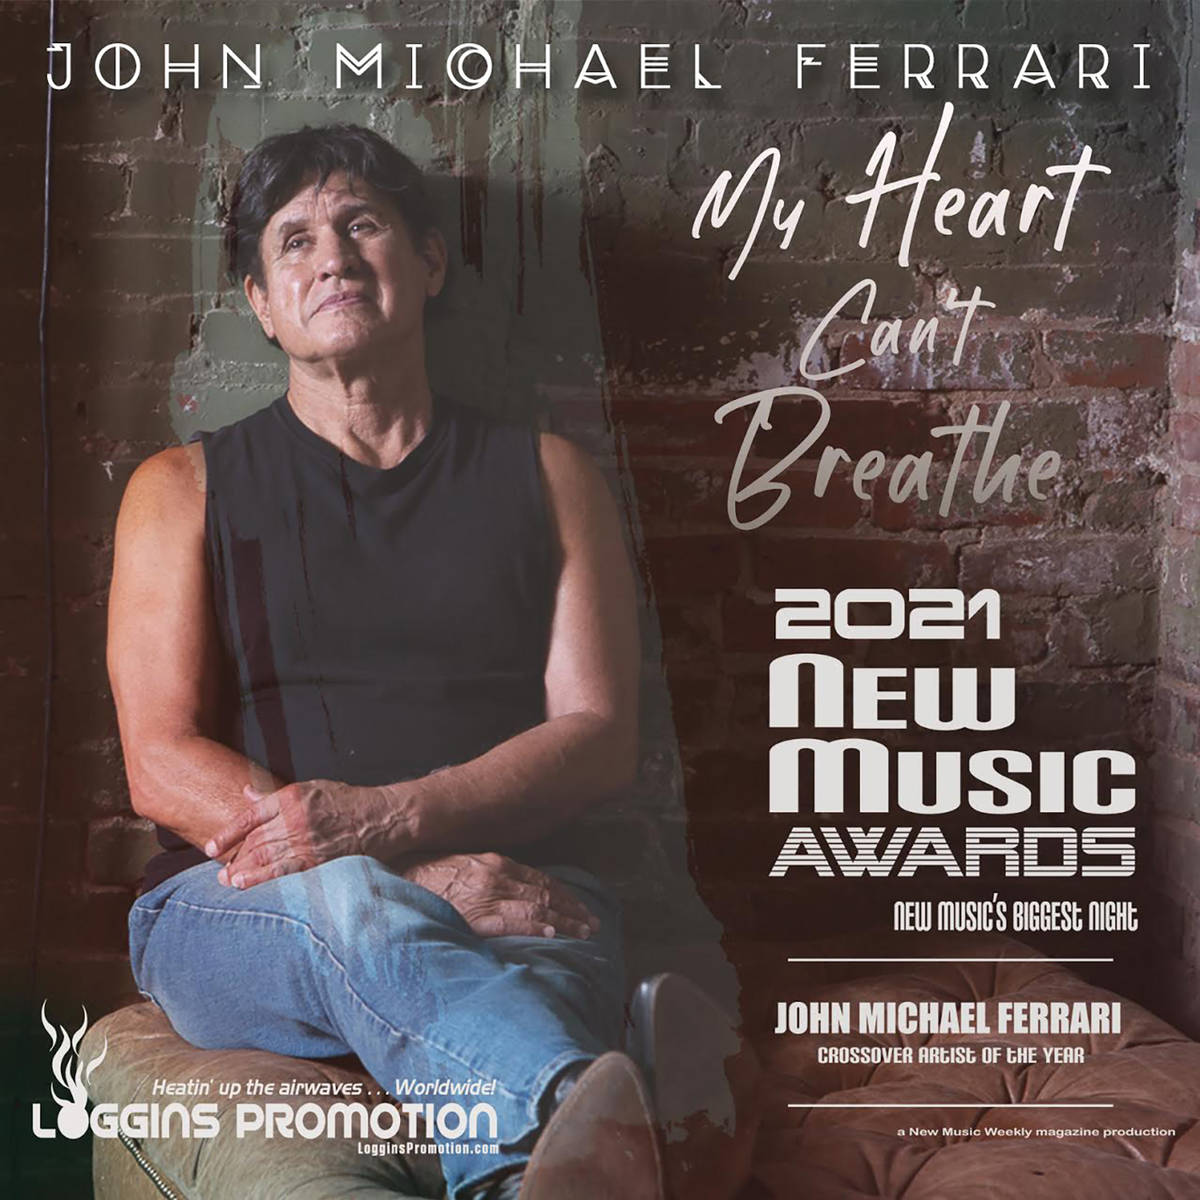 Special to the Pahrump Valley Times John Michael Ferrari's newest song "My Heart Can't Breathe" ...